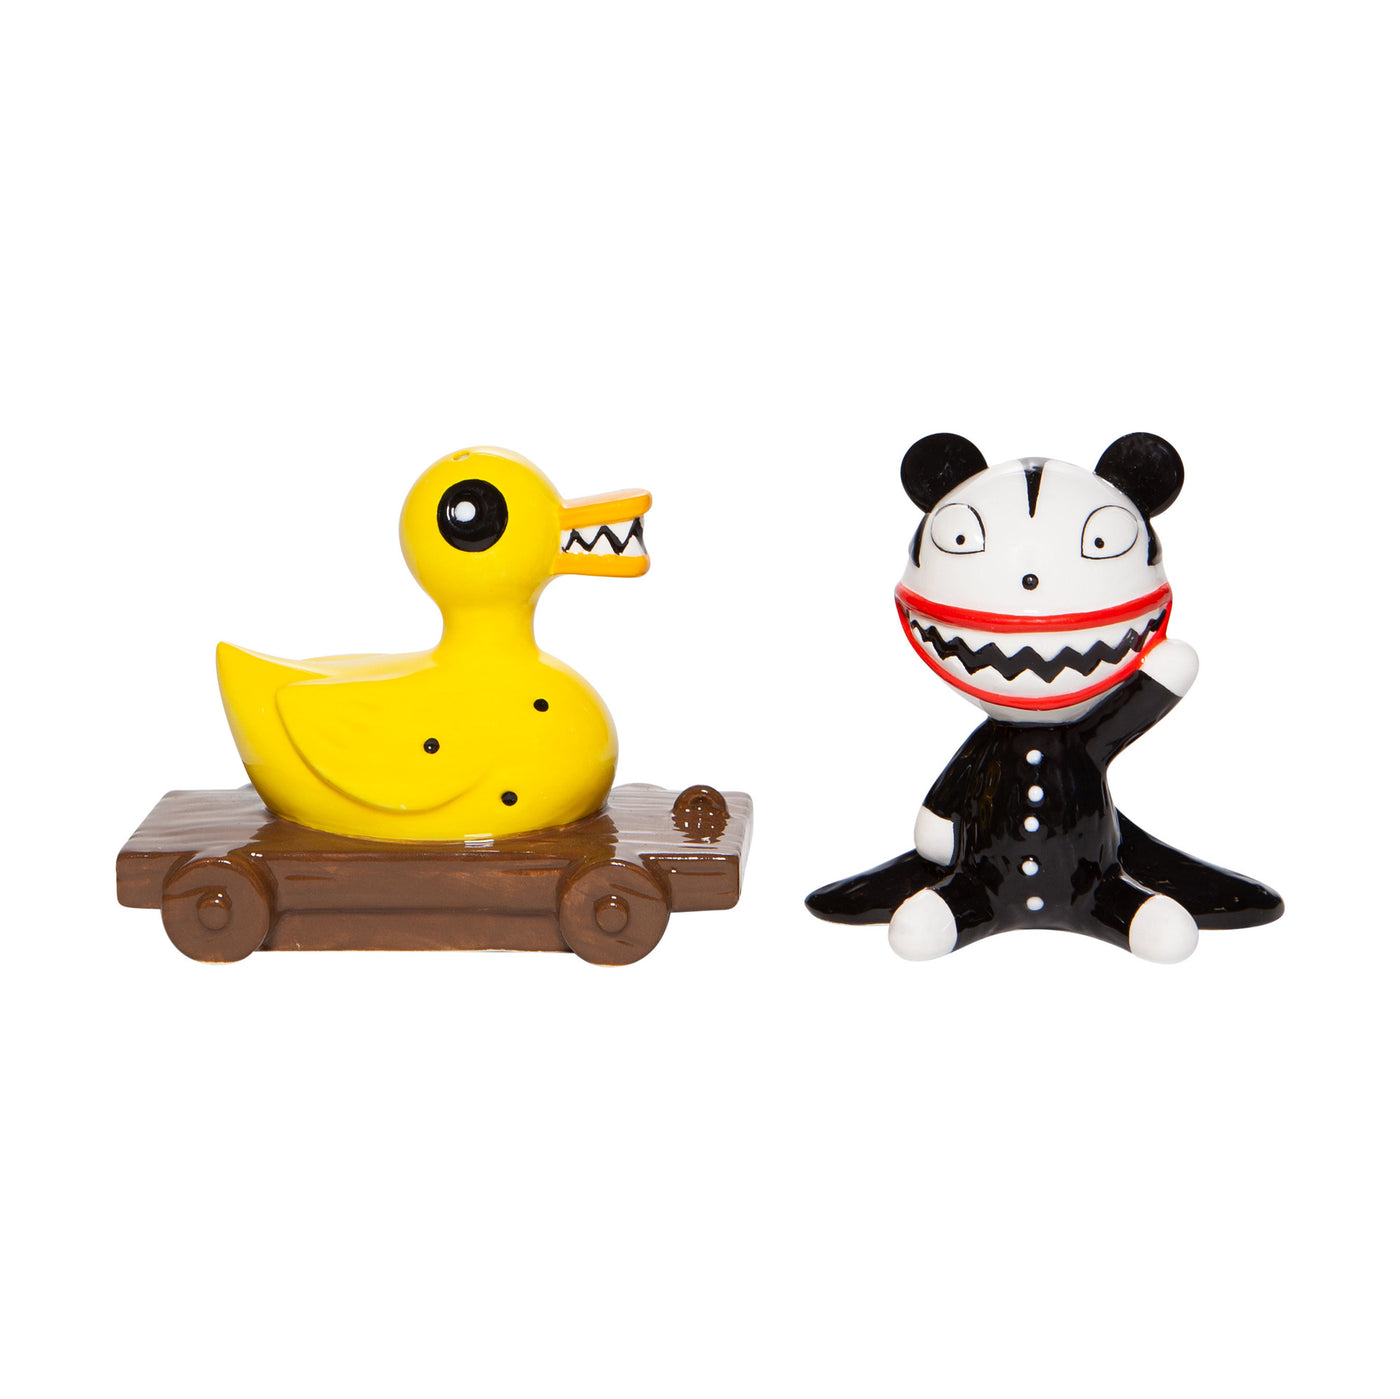 Department 56 Disney Scary Teddy and Duck Salt and Pepper Shaker New with Box